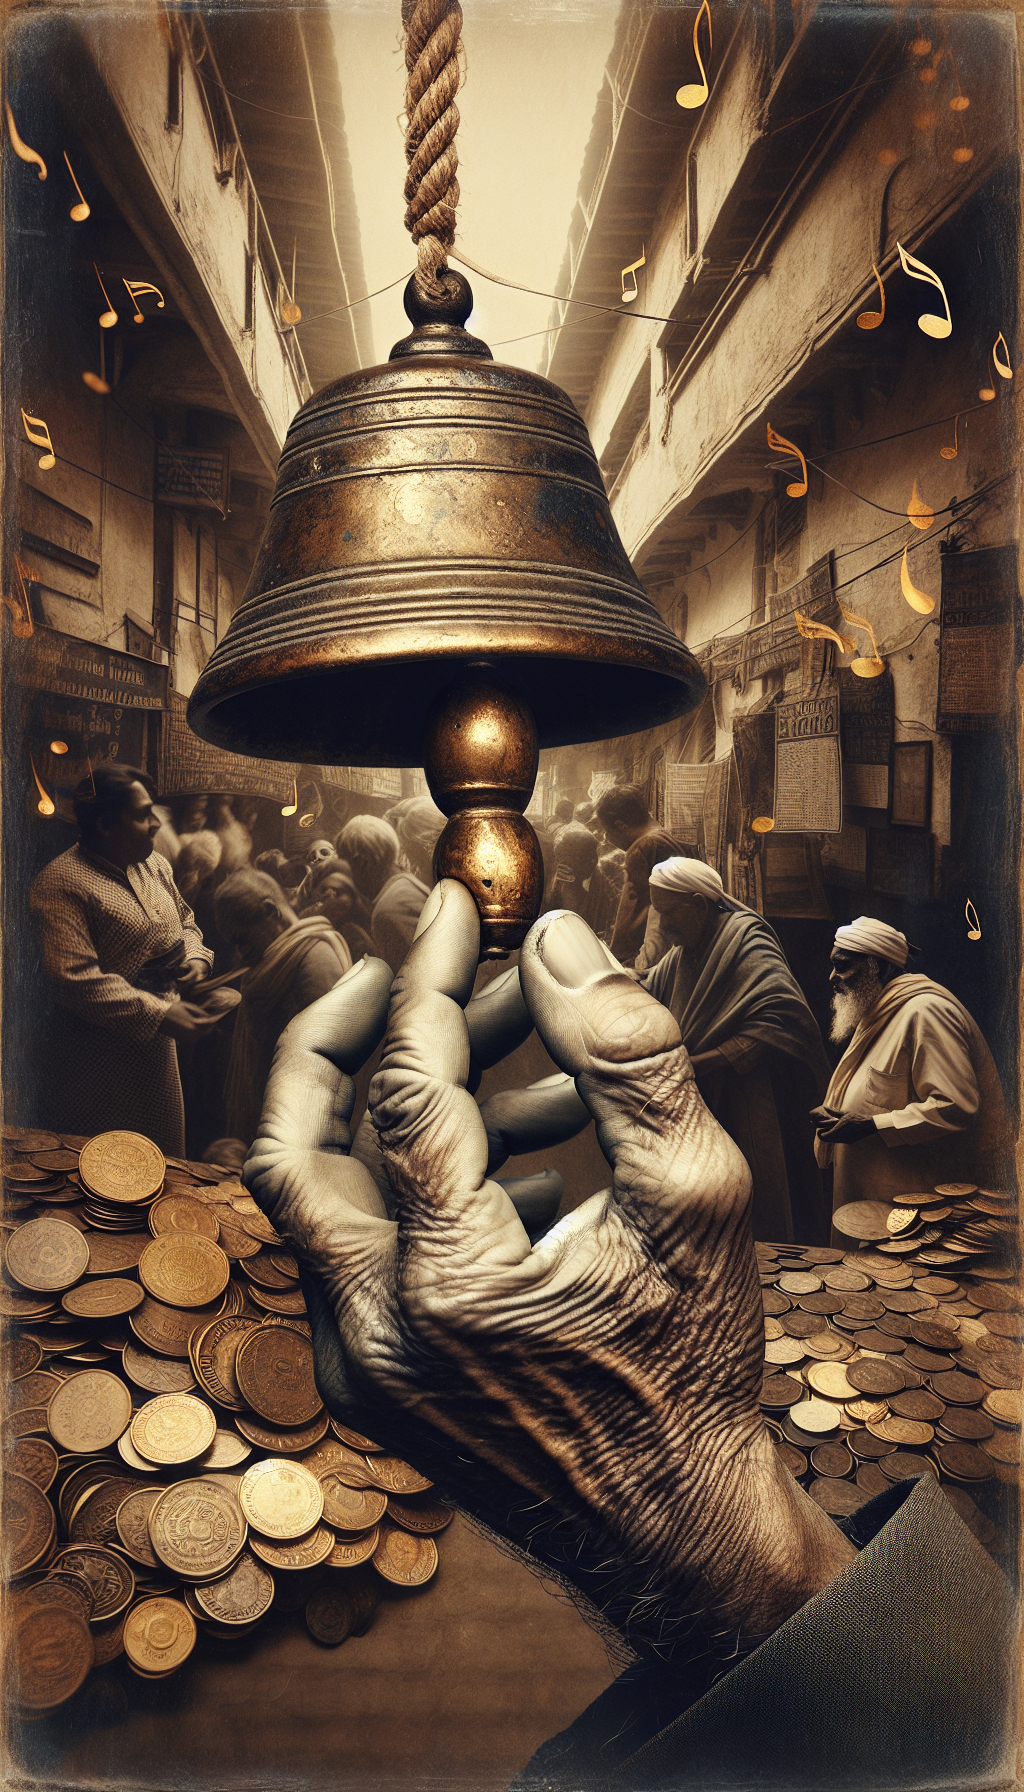 An elegantly aged hand rings a vintage cast iron bell whose clapper strikes gold coins instead of iron, symbolizing the discovery of value in the antique market. The image, rich with patina textures and sepia tones, juxtaposes the bell against a backdrop of buyers and sellers exchanging treasures, with golden notes dancing around the bell, hinting at the sound's worth. 16:9.